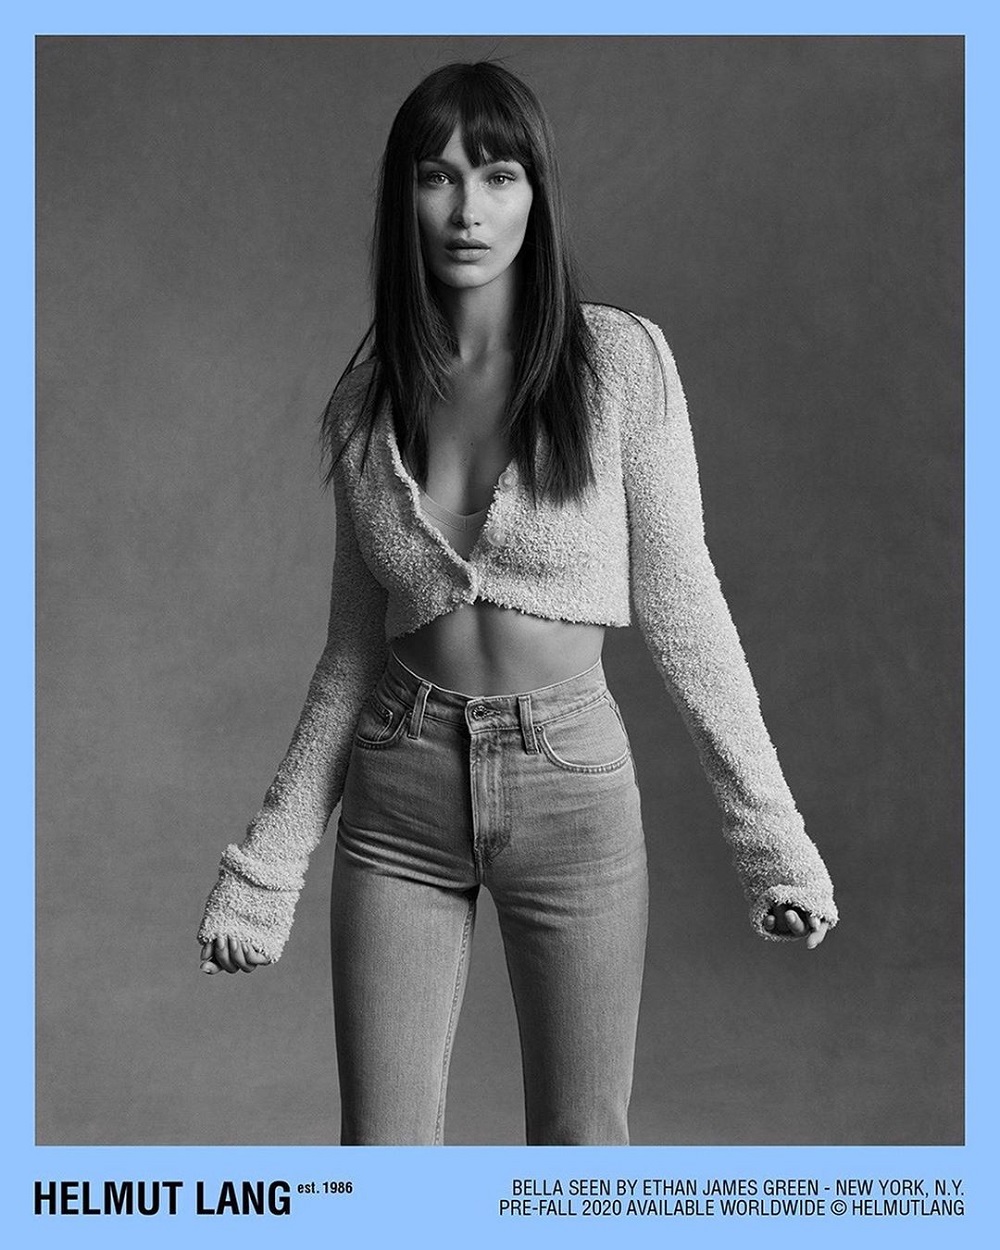 Bella Hadid by Ethan James Green for Helmut Lang Pre-Fall 2020 Ad